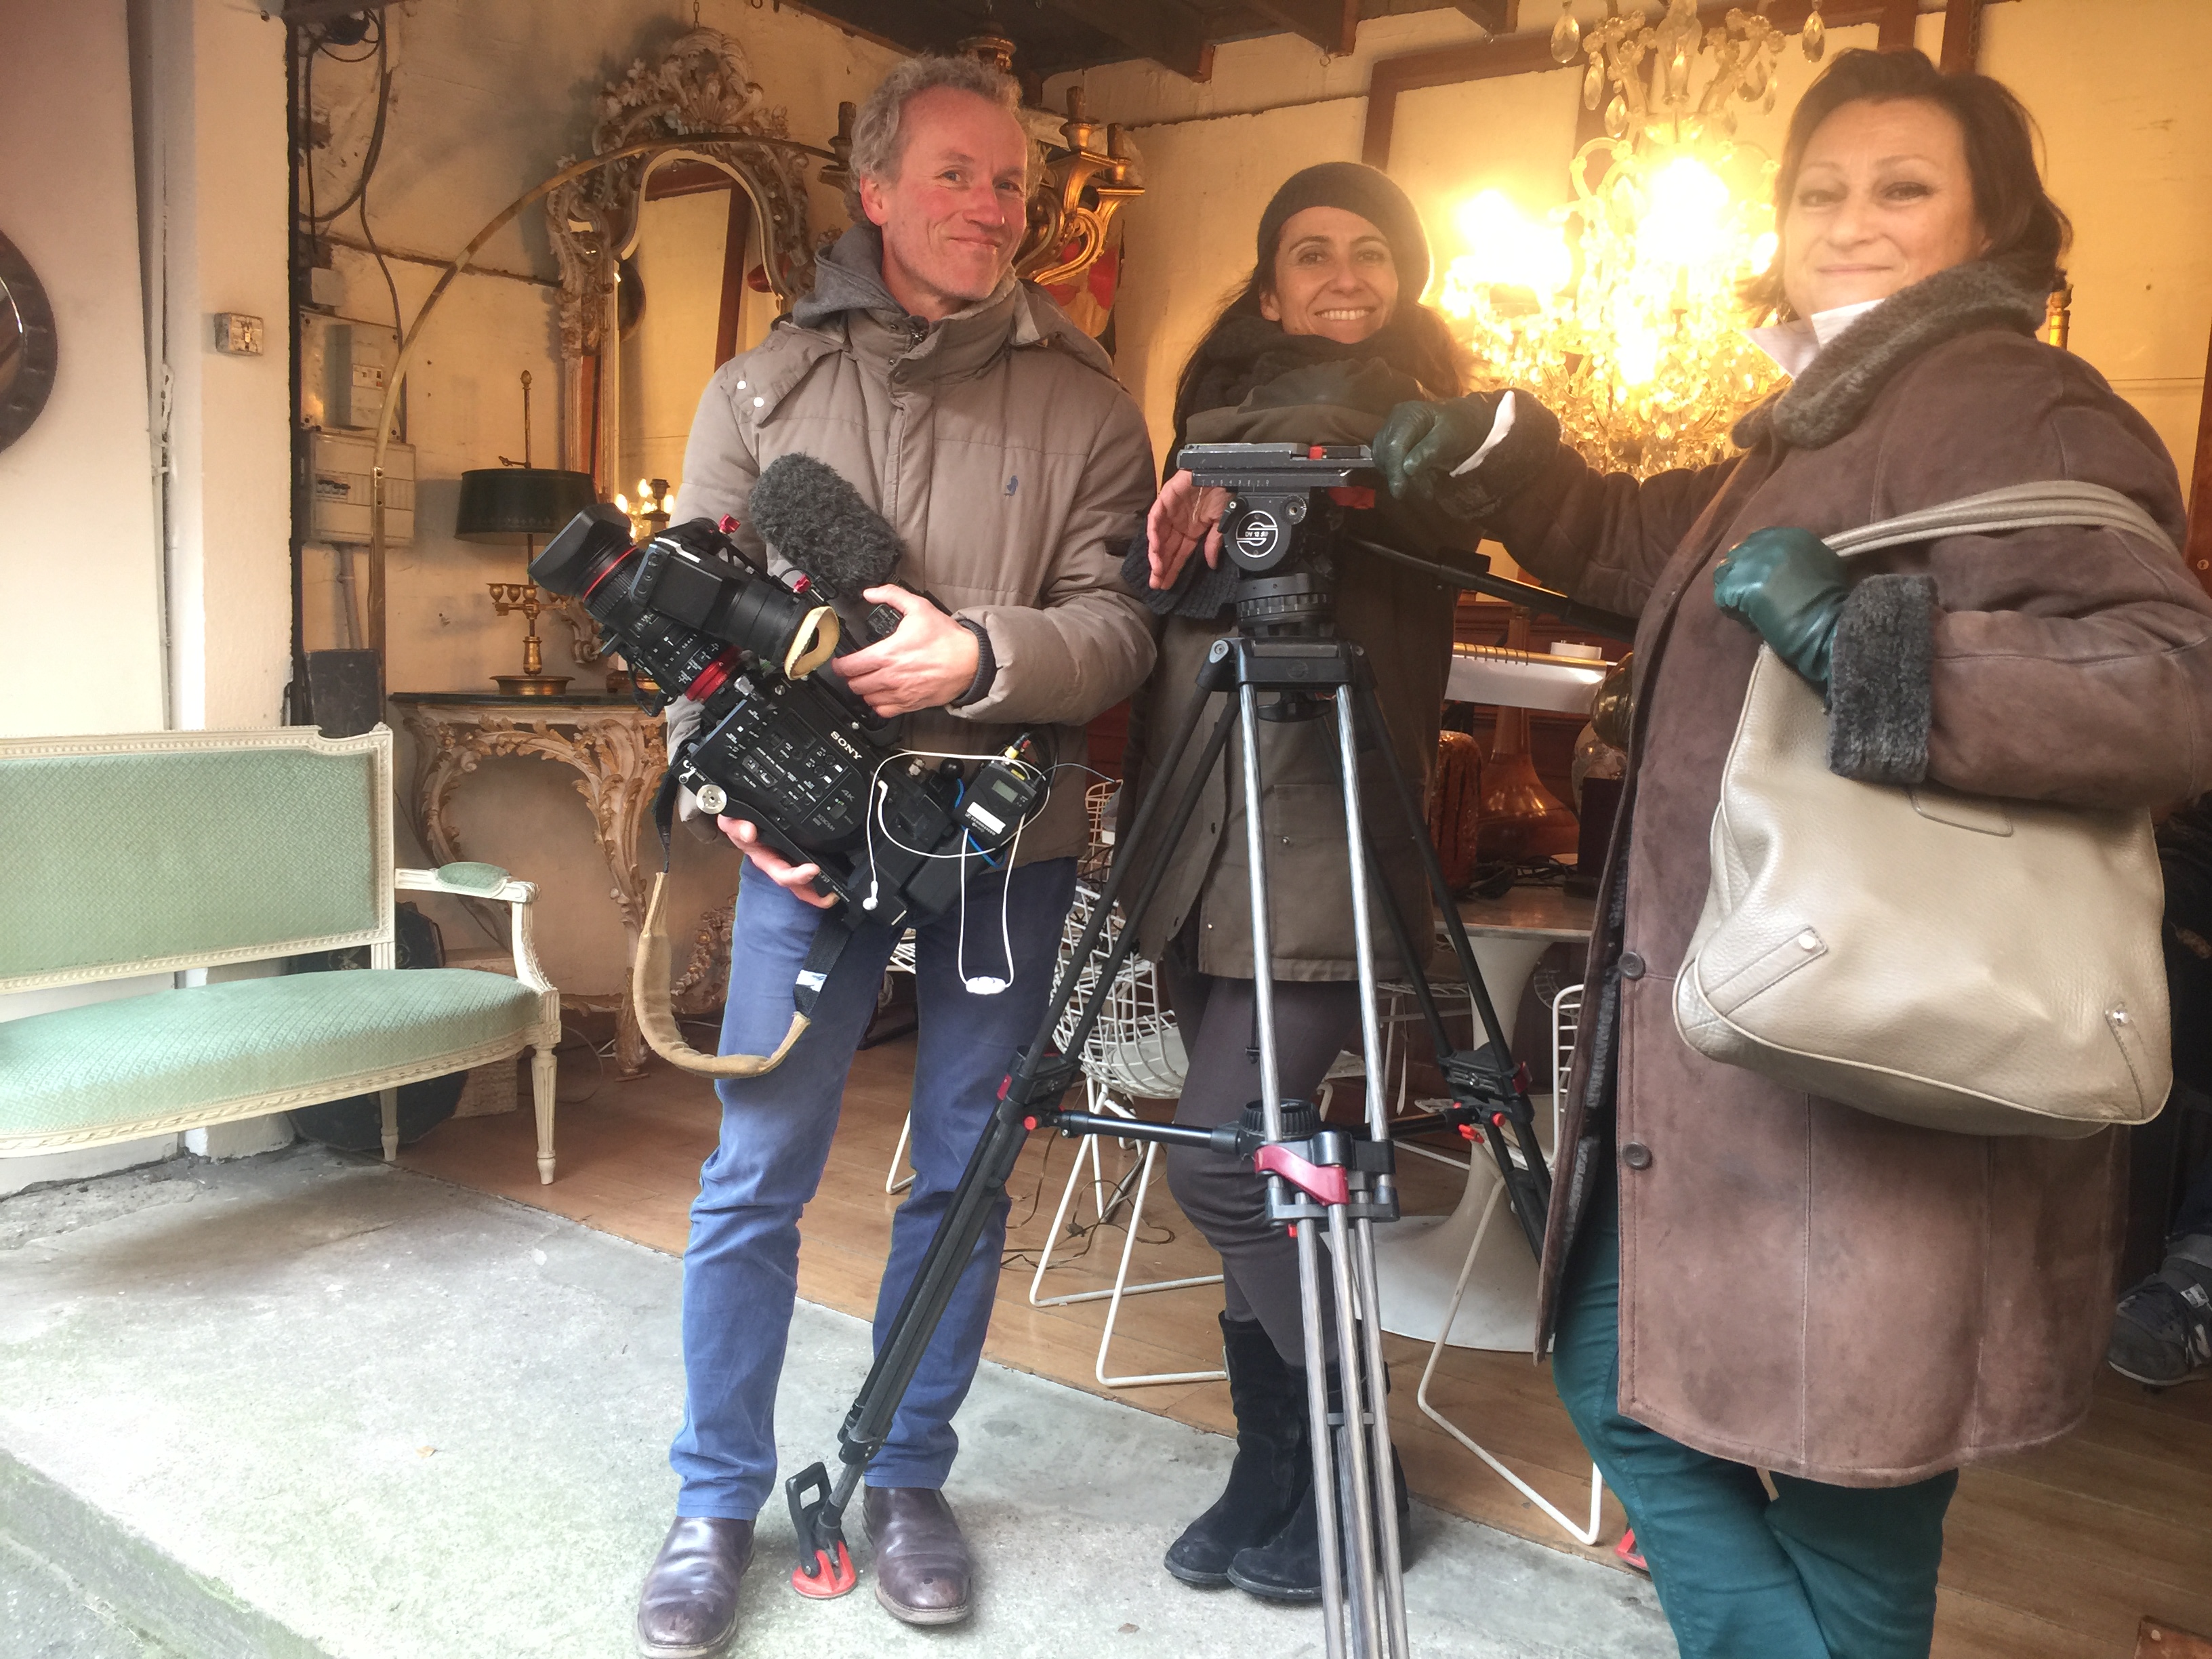 Diva Guide Danielle filming with TF1